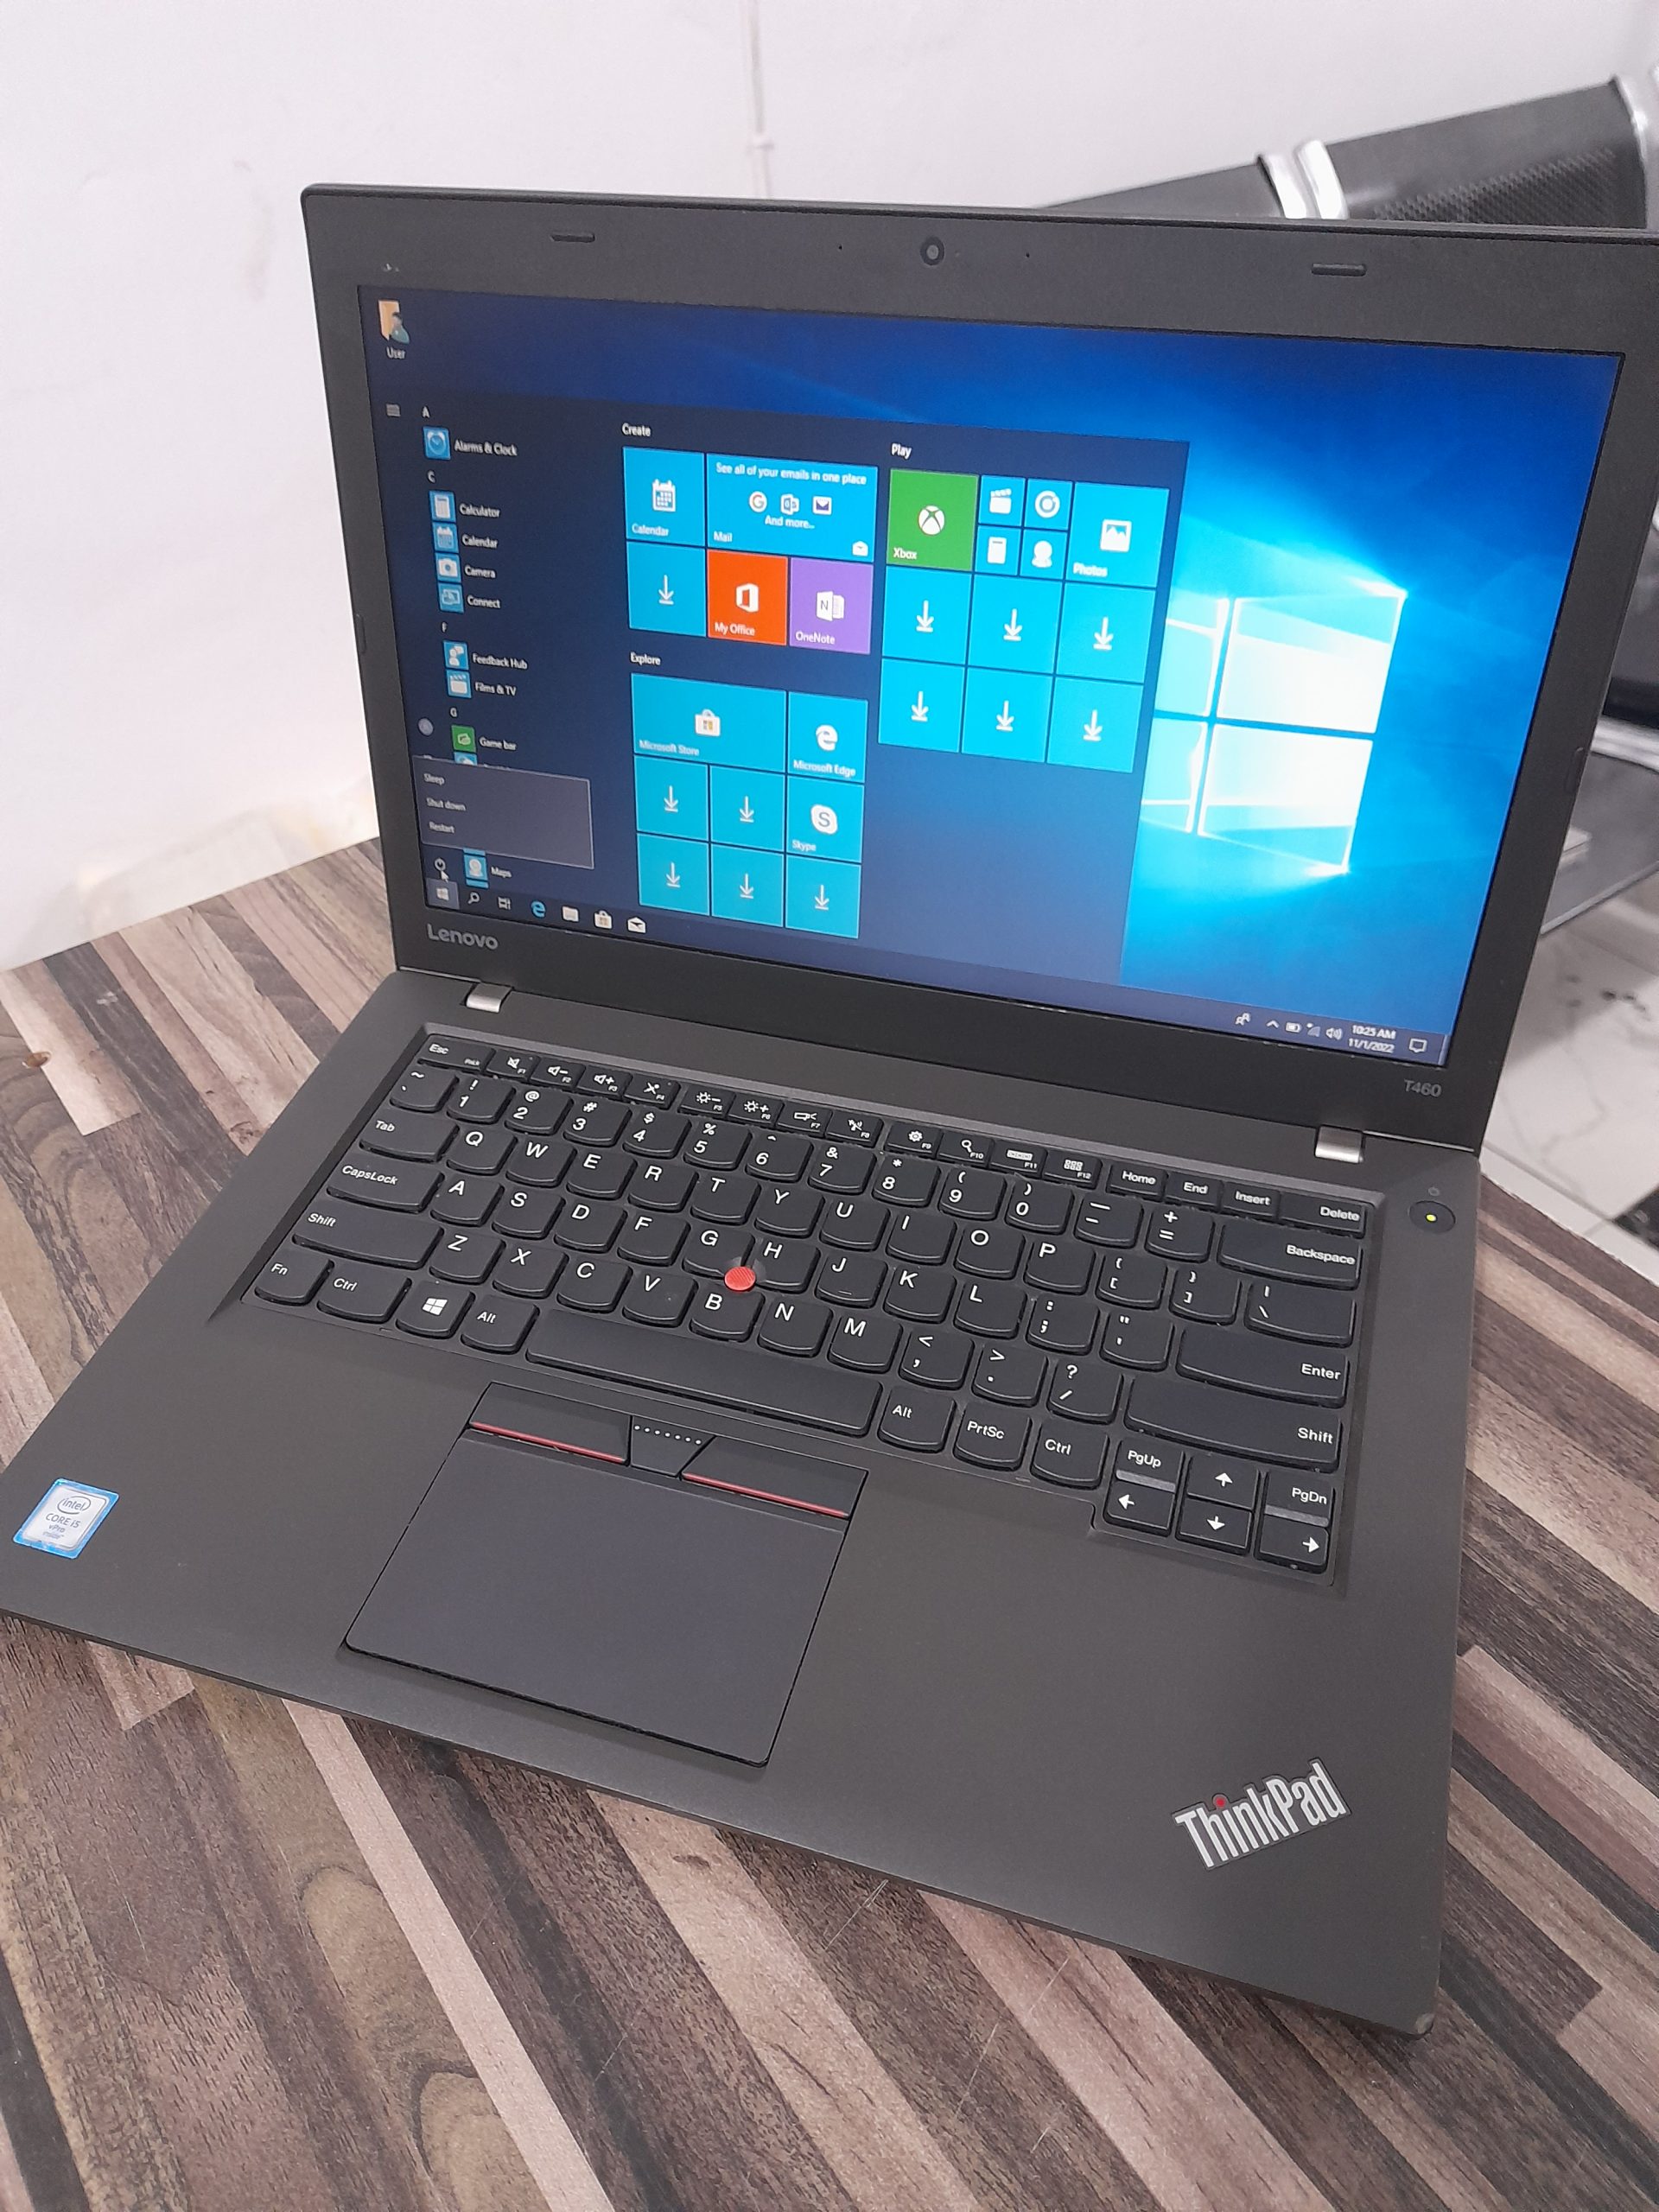 american used lenovo thinkpad T460s for sale in lagos computer village lagos, used laptops for sale, canada used laptops for sale in lagos computer village, affordable laptops for sale in ikeja compkuter village, wholesale computer shop in ikeja, best computer engineering shop in ikeja computer village, how to start laptop business in lagos, laptop for sale in oshodi, laptops for sale in ikeja, laptops for sale in lagos island, laptops for sale in wholesale in alaba international lagos, wholes computer shops in alaba international market lagos, laptops for sale in ladipo lagos, affordable laptops for sale in trade fair lagos,new american hp laptop arrival in ikeja, best hp laptops for sale in computer village,